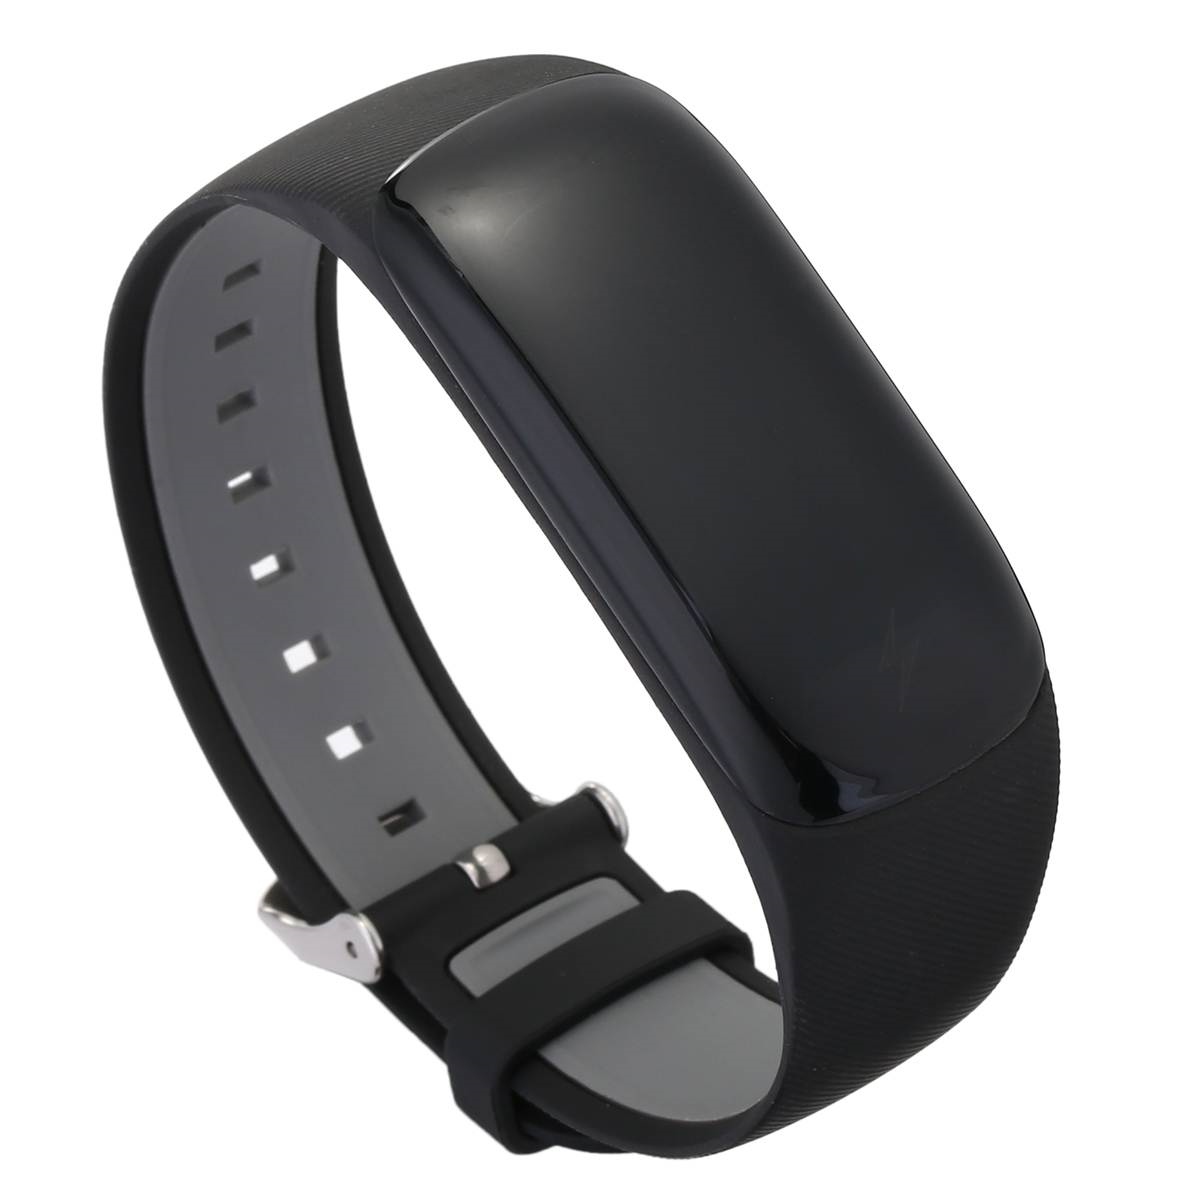 ♝☽▪ Z17 0.96inch OLED Smart Watch HR Monitor Real-Time Route Tracking Sport Bracelet Wristband Smart Activity Tracker free shipping